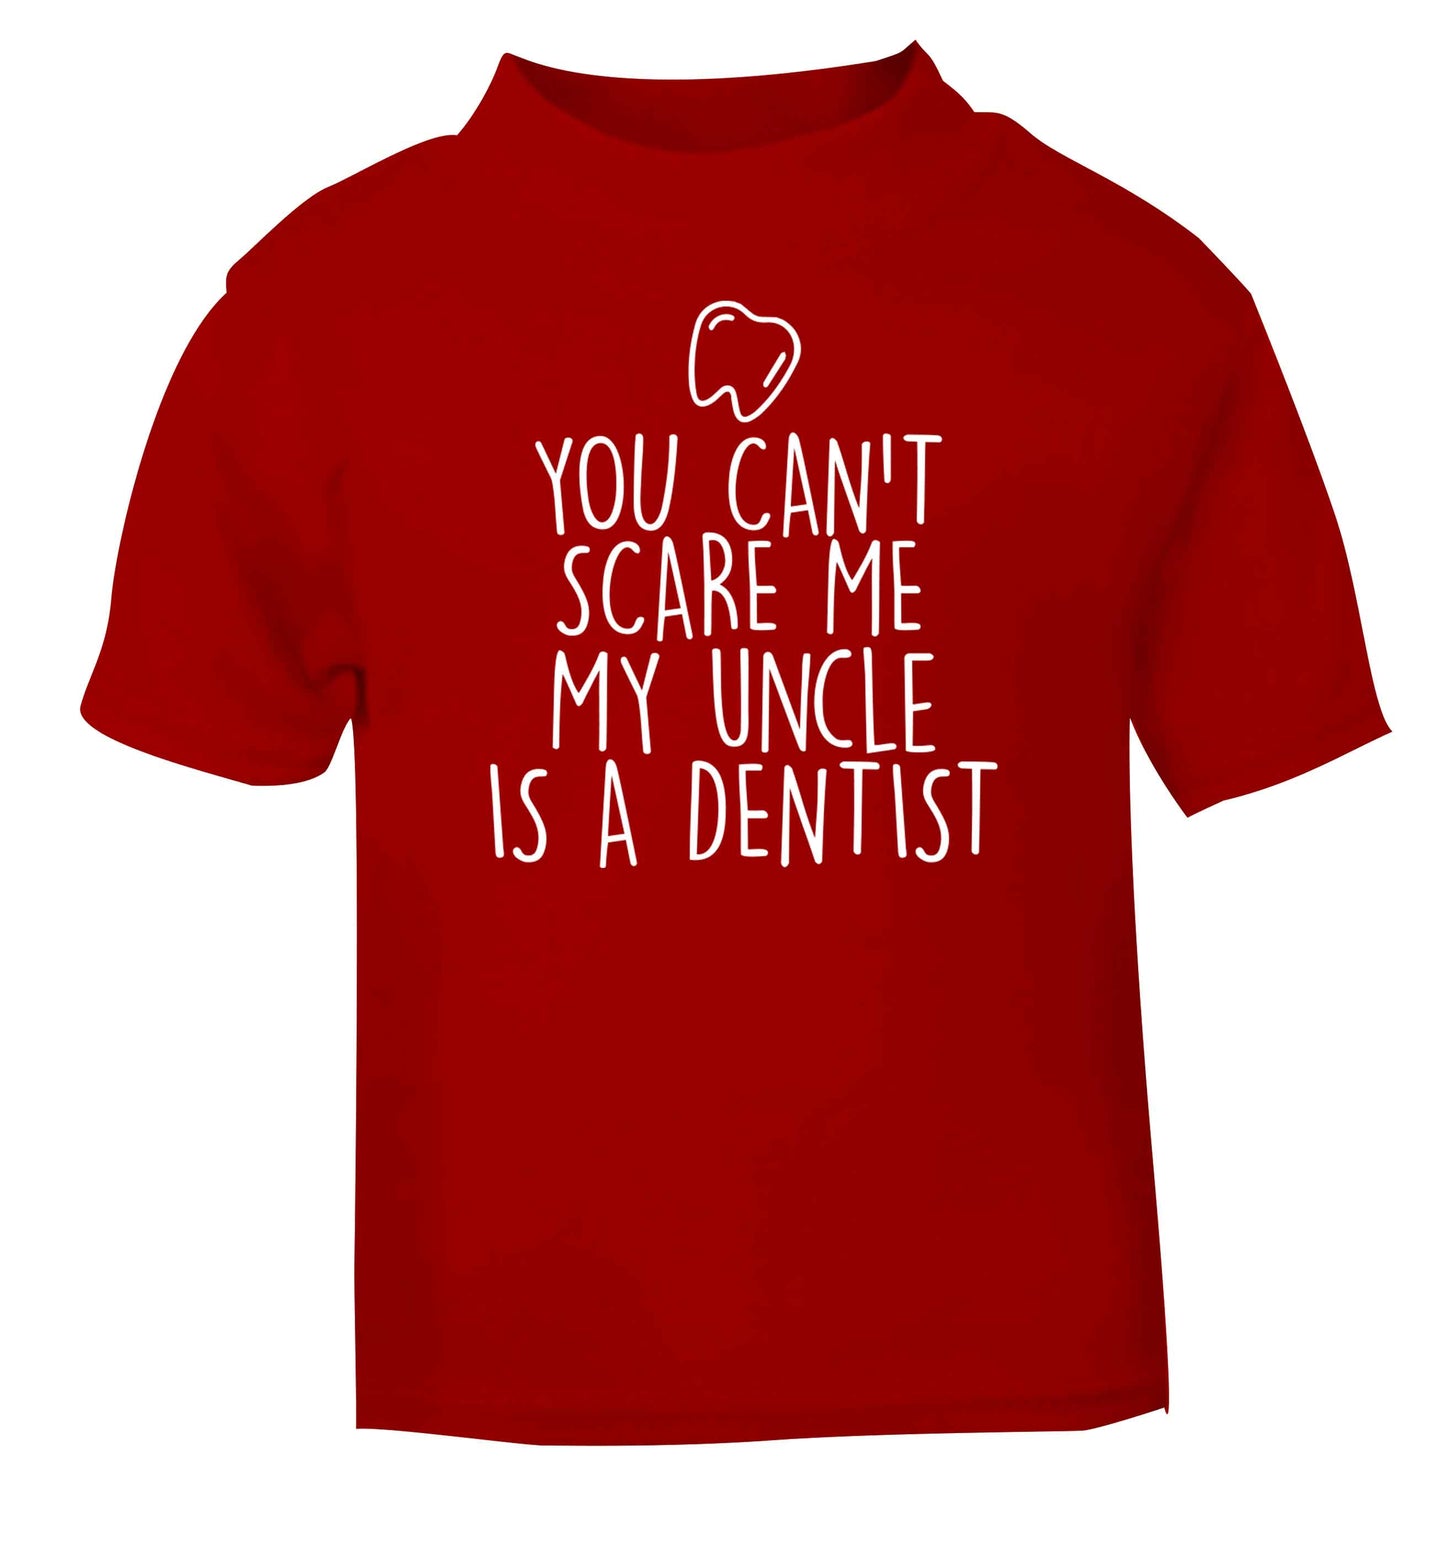 You can't scare me my uncle is a dentist red baby toddler Tshirt 2 Years